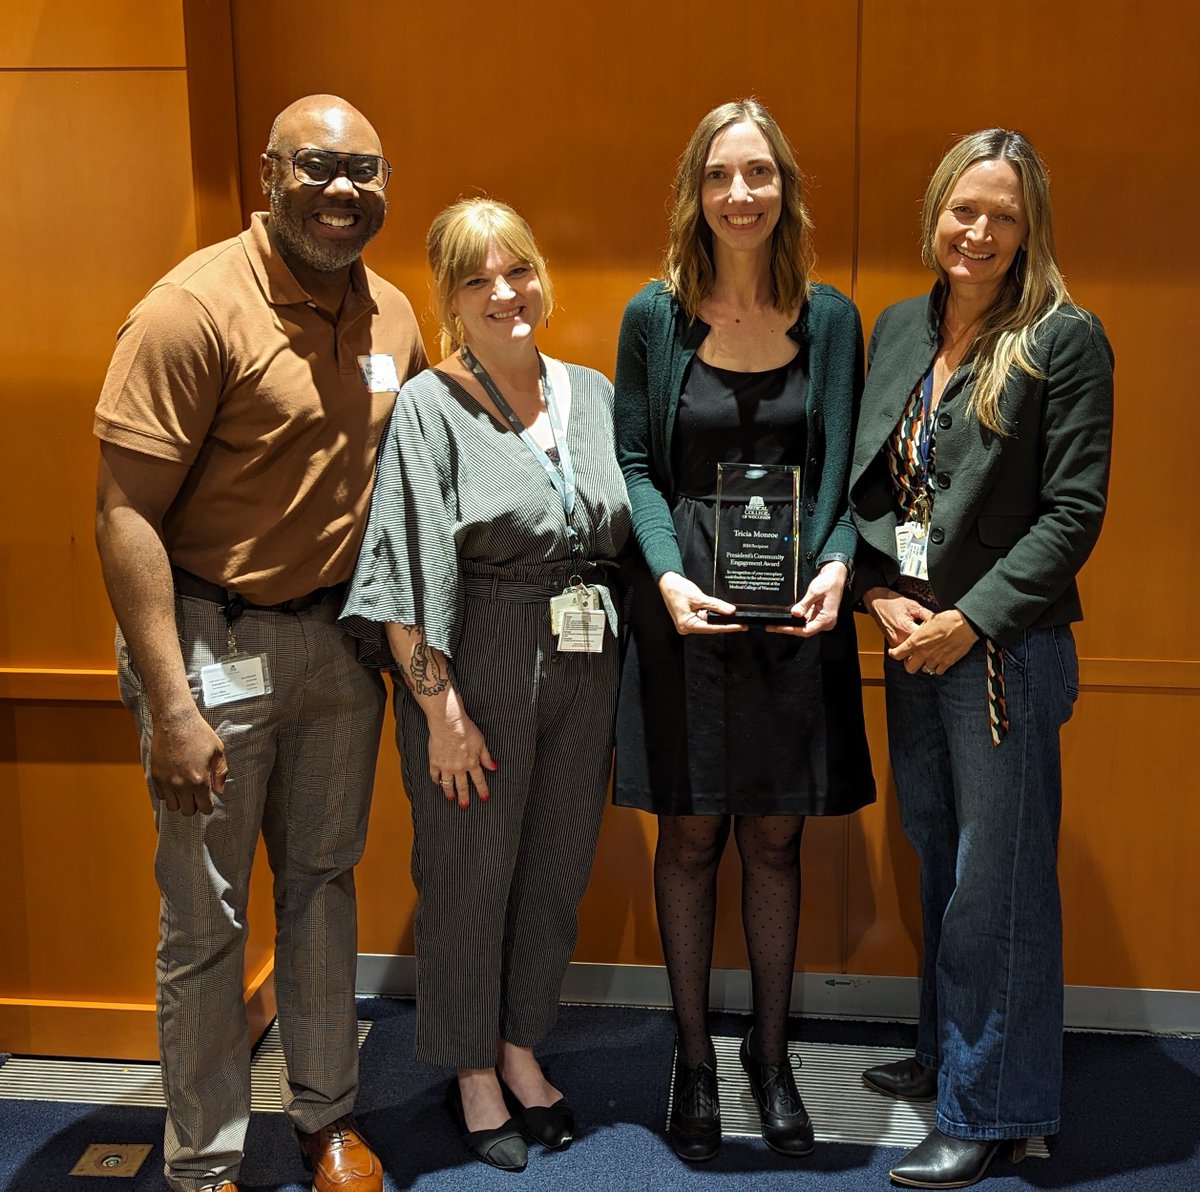 Congrats to our @MCWSuicidePrev Postvention Program Manager Tricia Monroe for receiving the MCW President's Community Engagement Award! Through her work, she helps survivors of suicide loss in MKE Co. to connect with needed supports and resources. Way to go, Tricia!